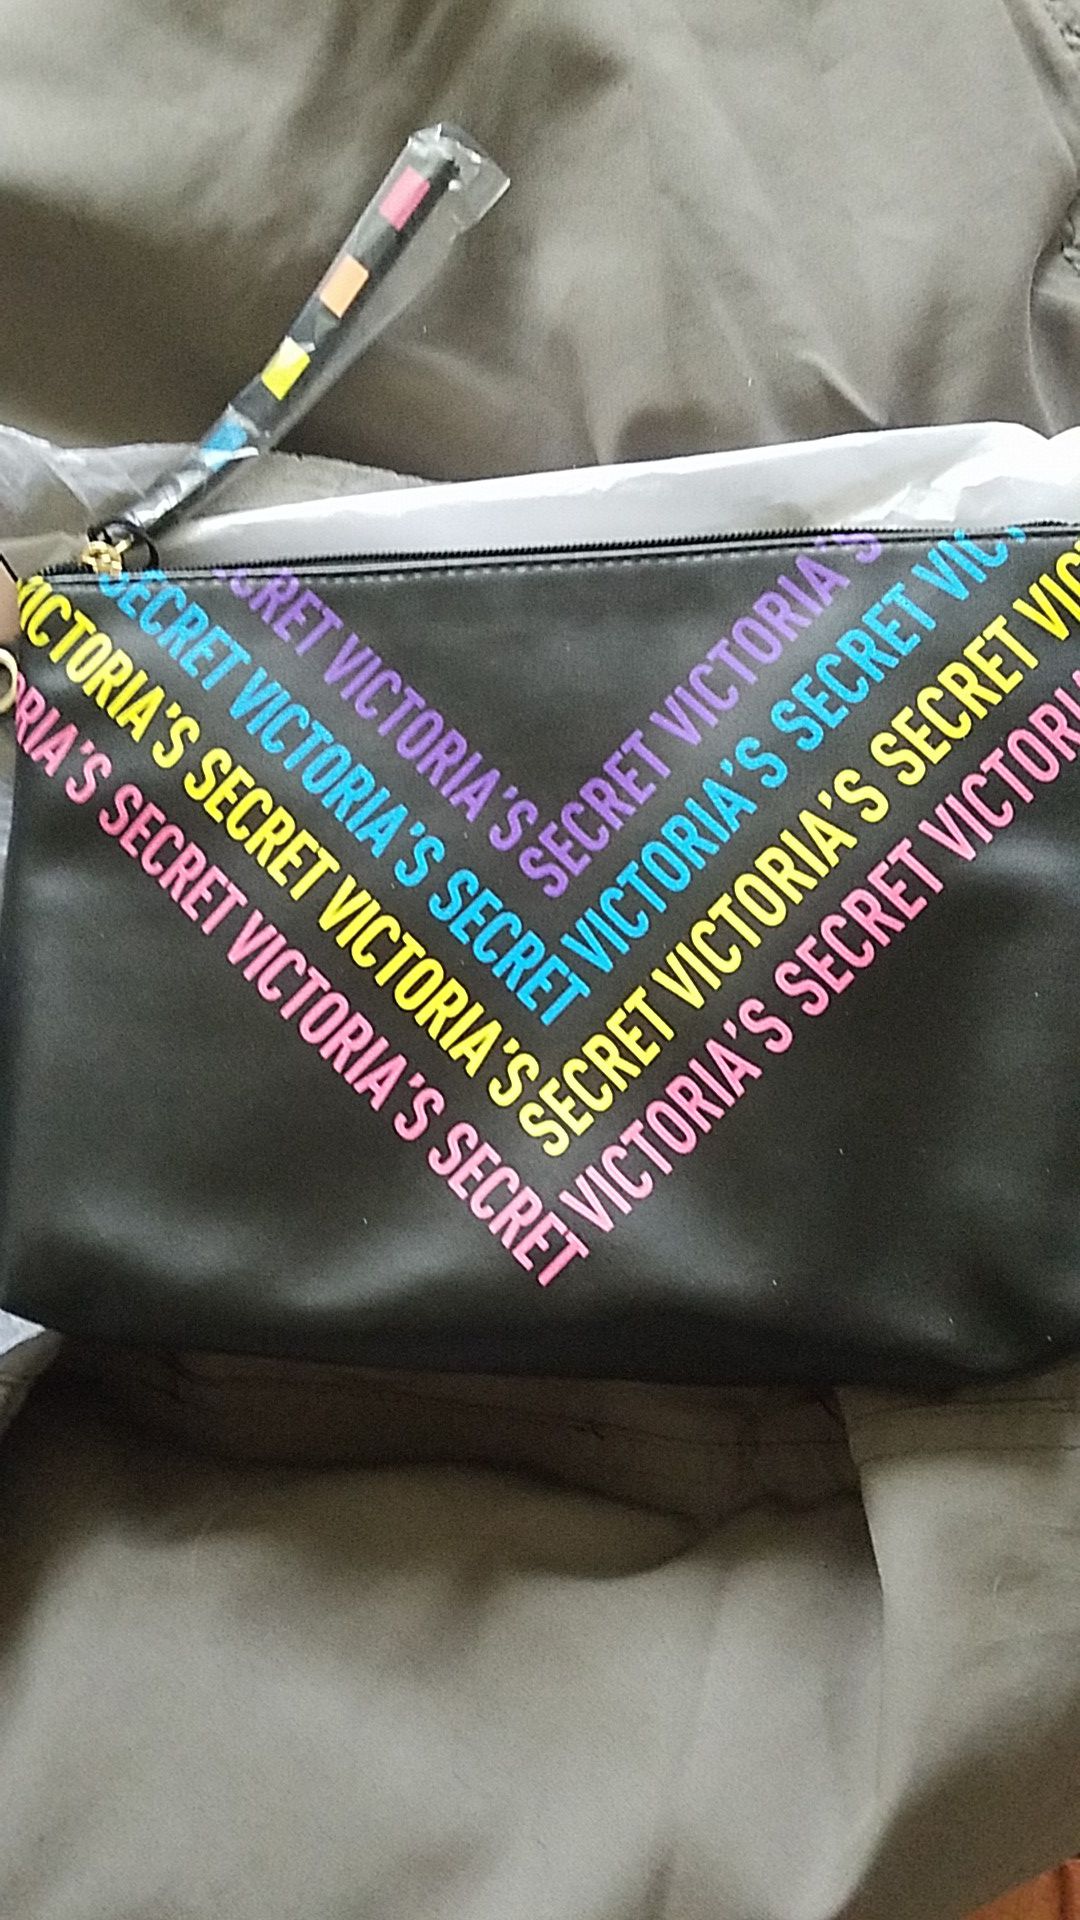 Victoria's Secret wristlet black with Victoria's Secret written on it new with tags